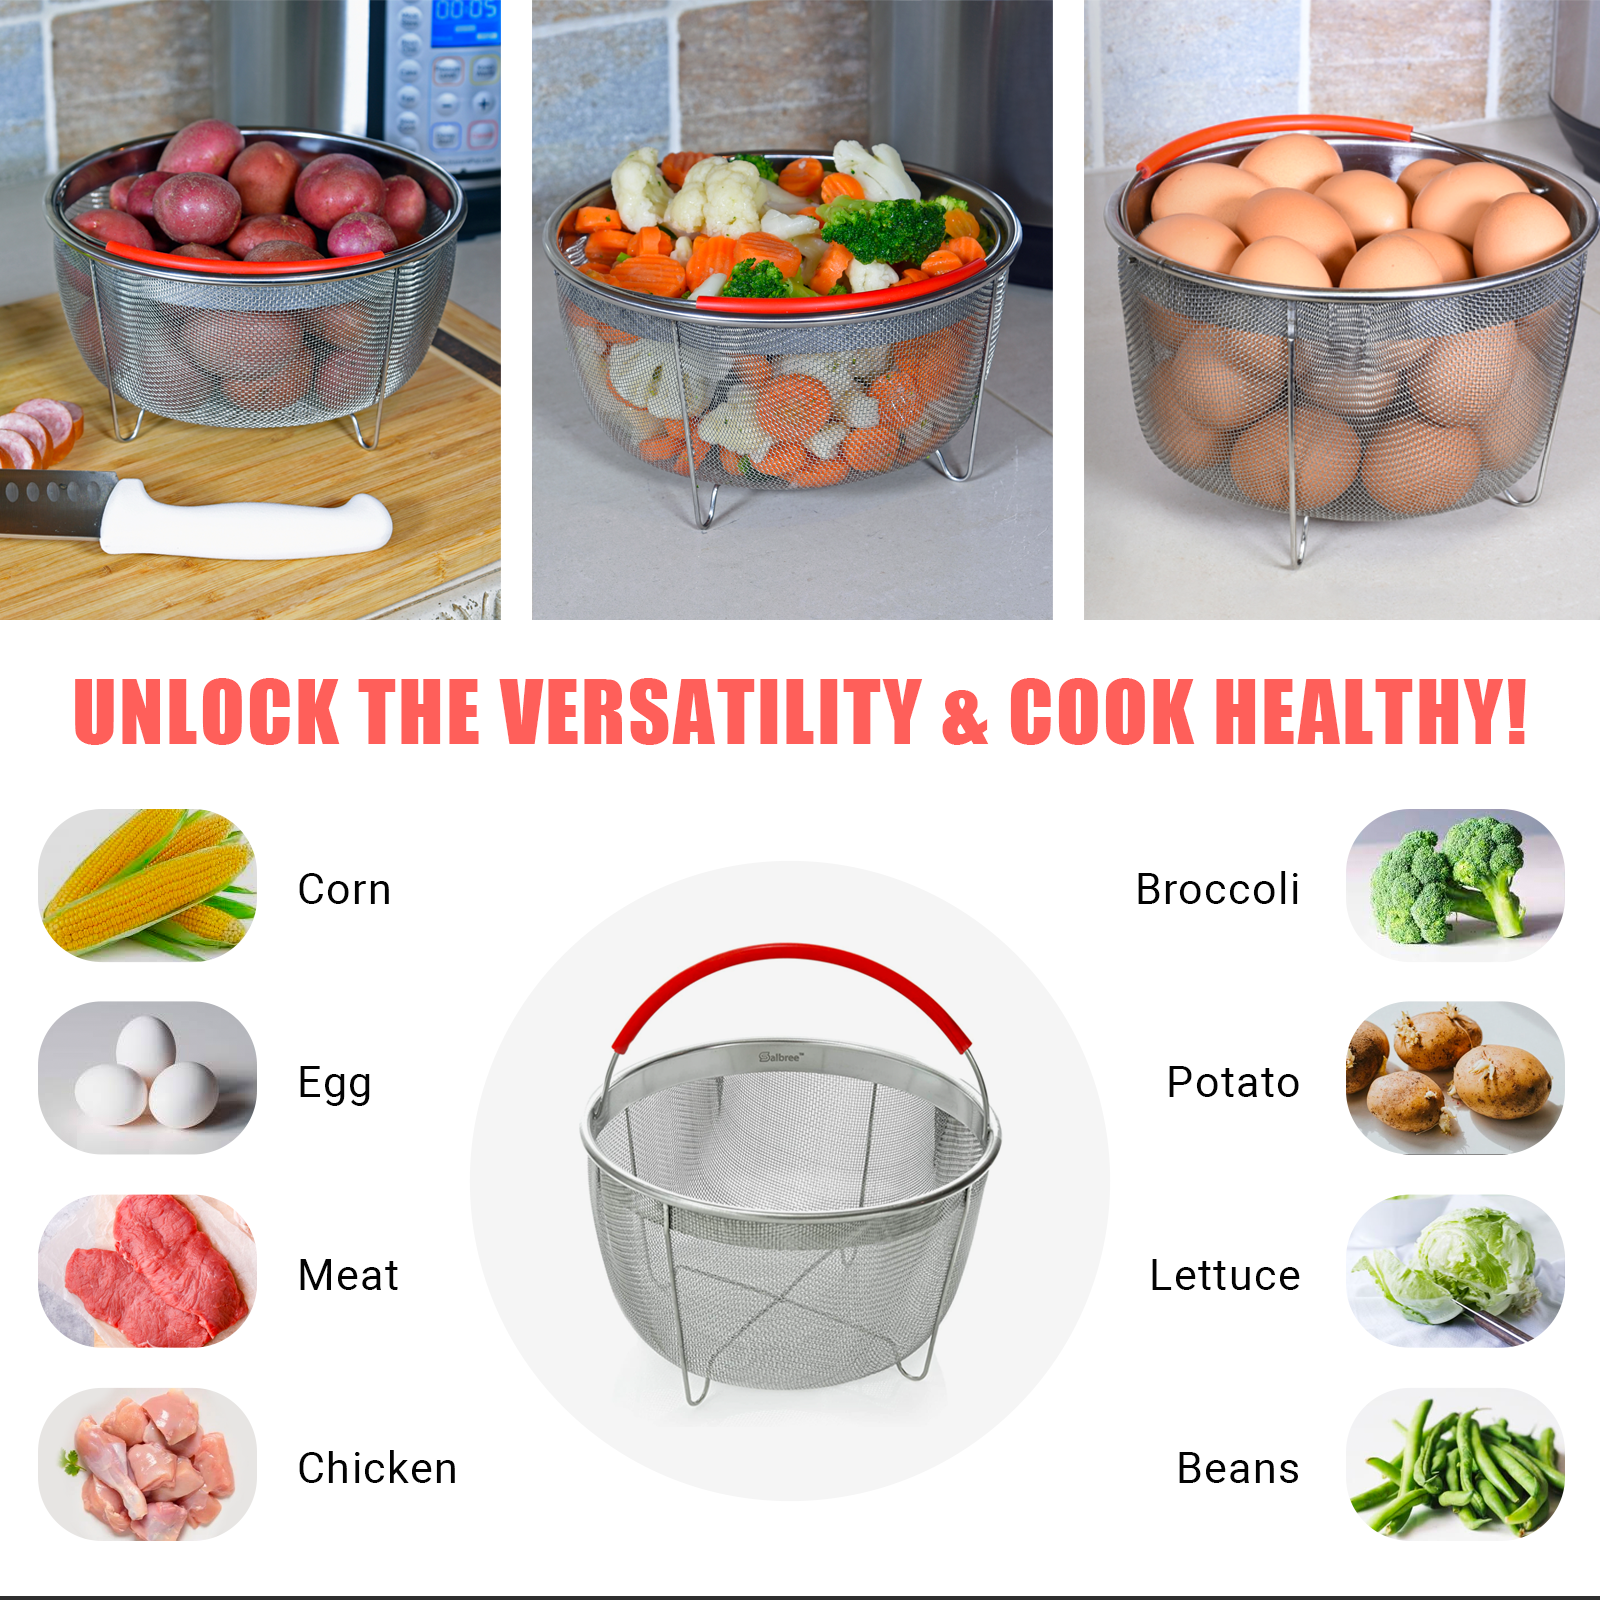 High Quality Large Size Stainless Steel 8 Qt Steamer Basket for